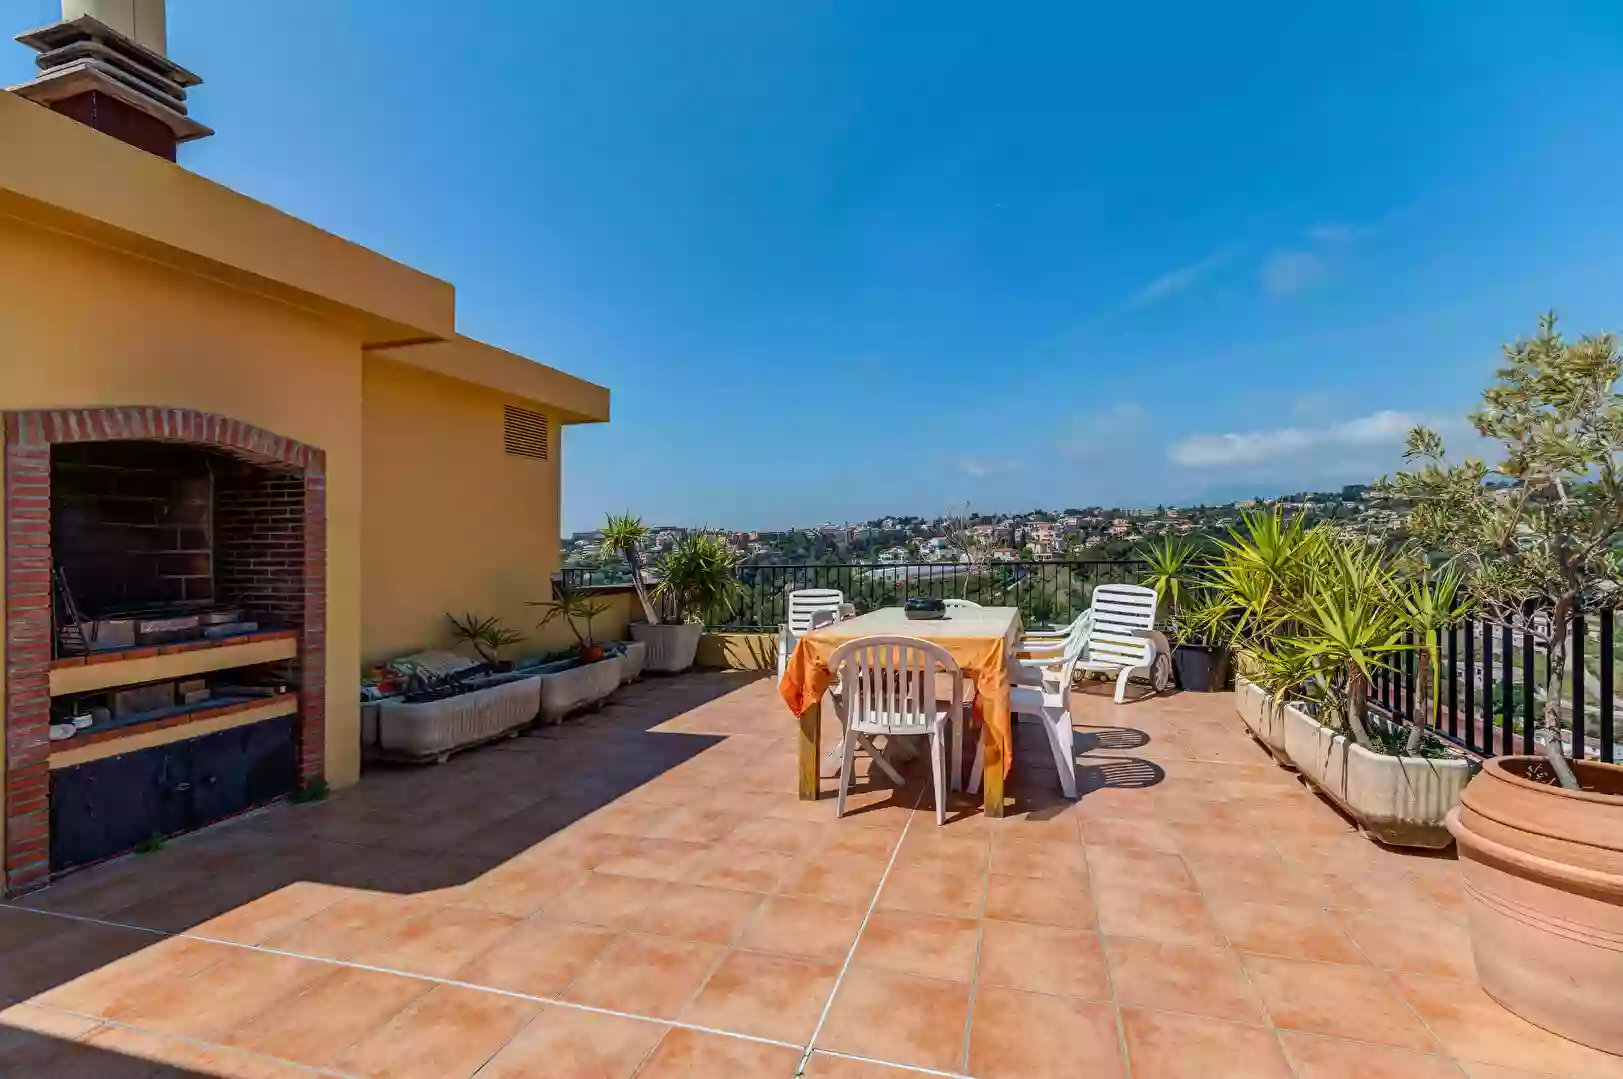 French Cote d'Azur: 3 bedroom duplex for sale in the heart of Nice